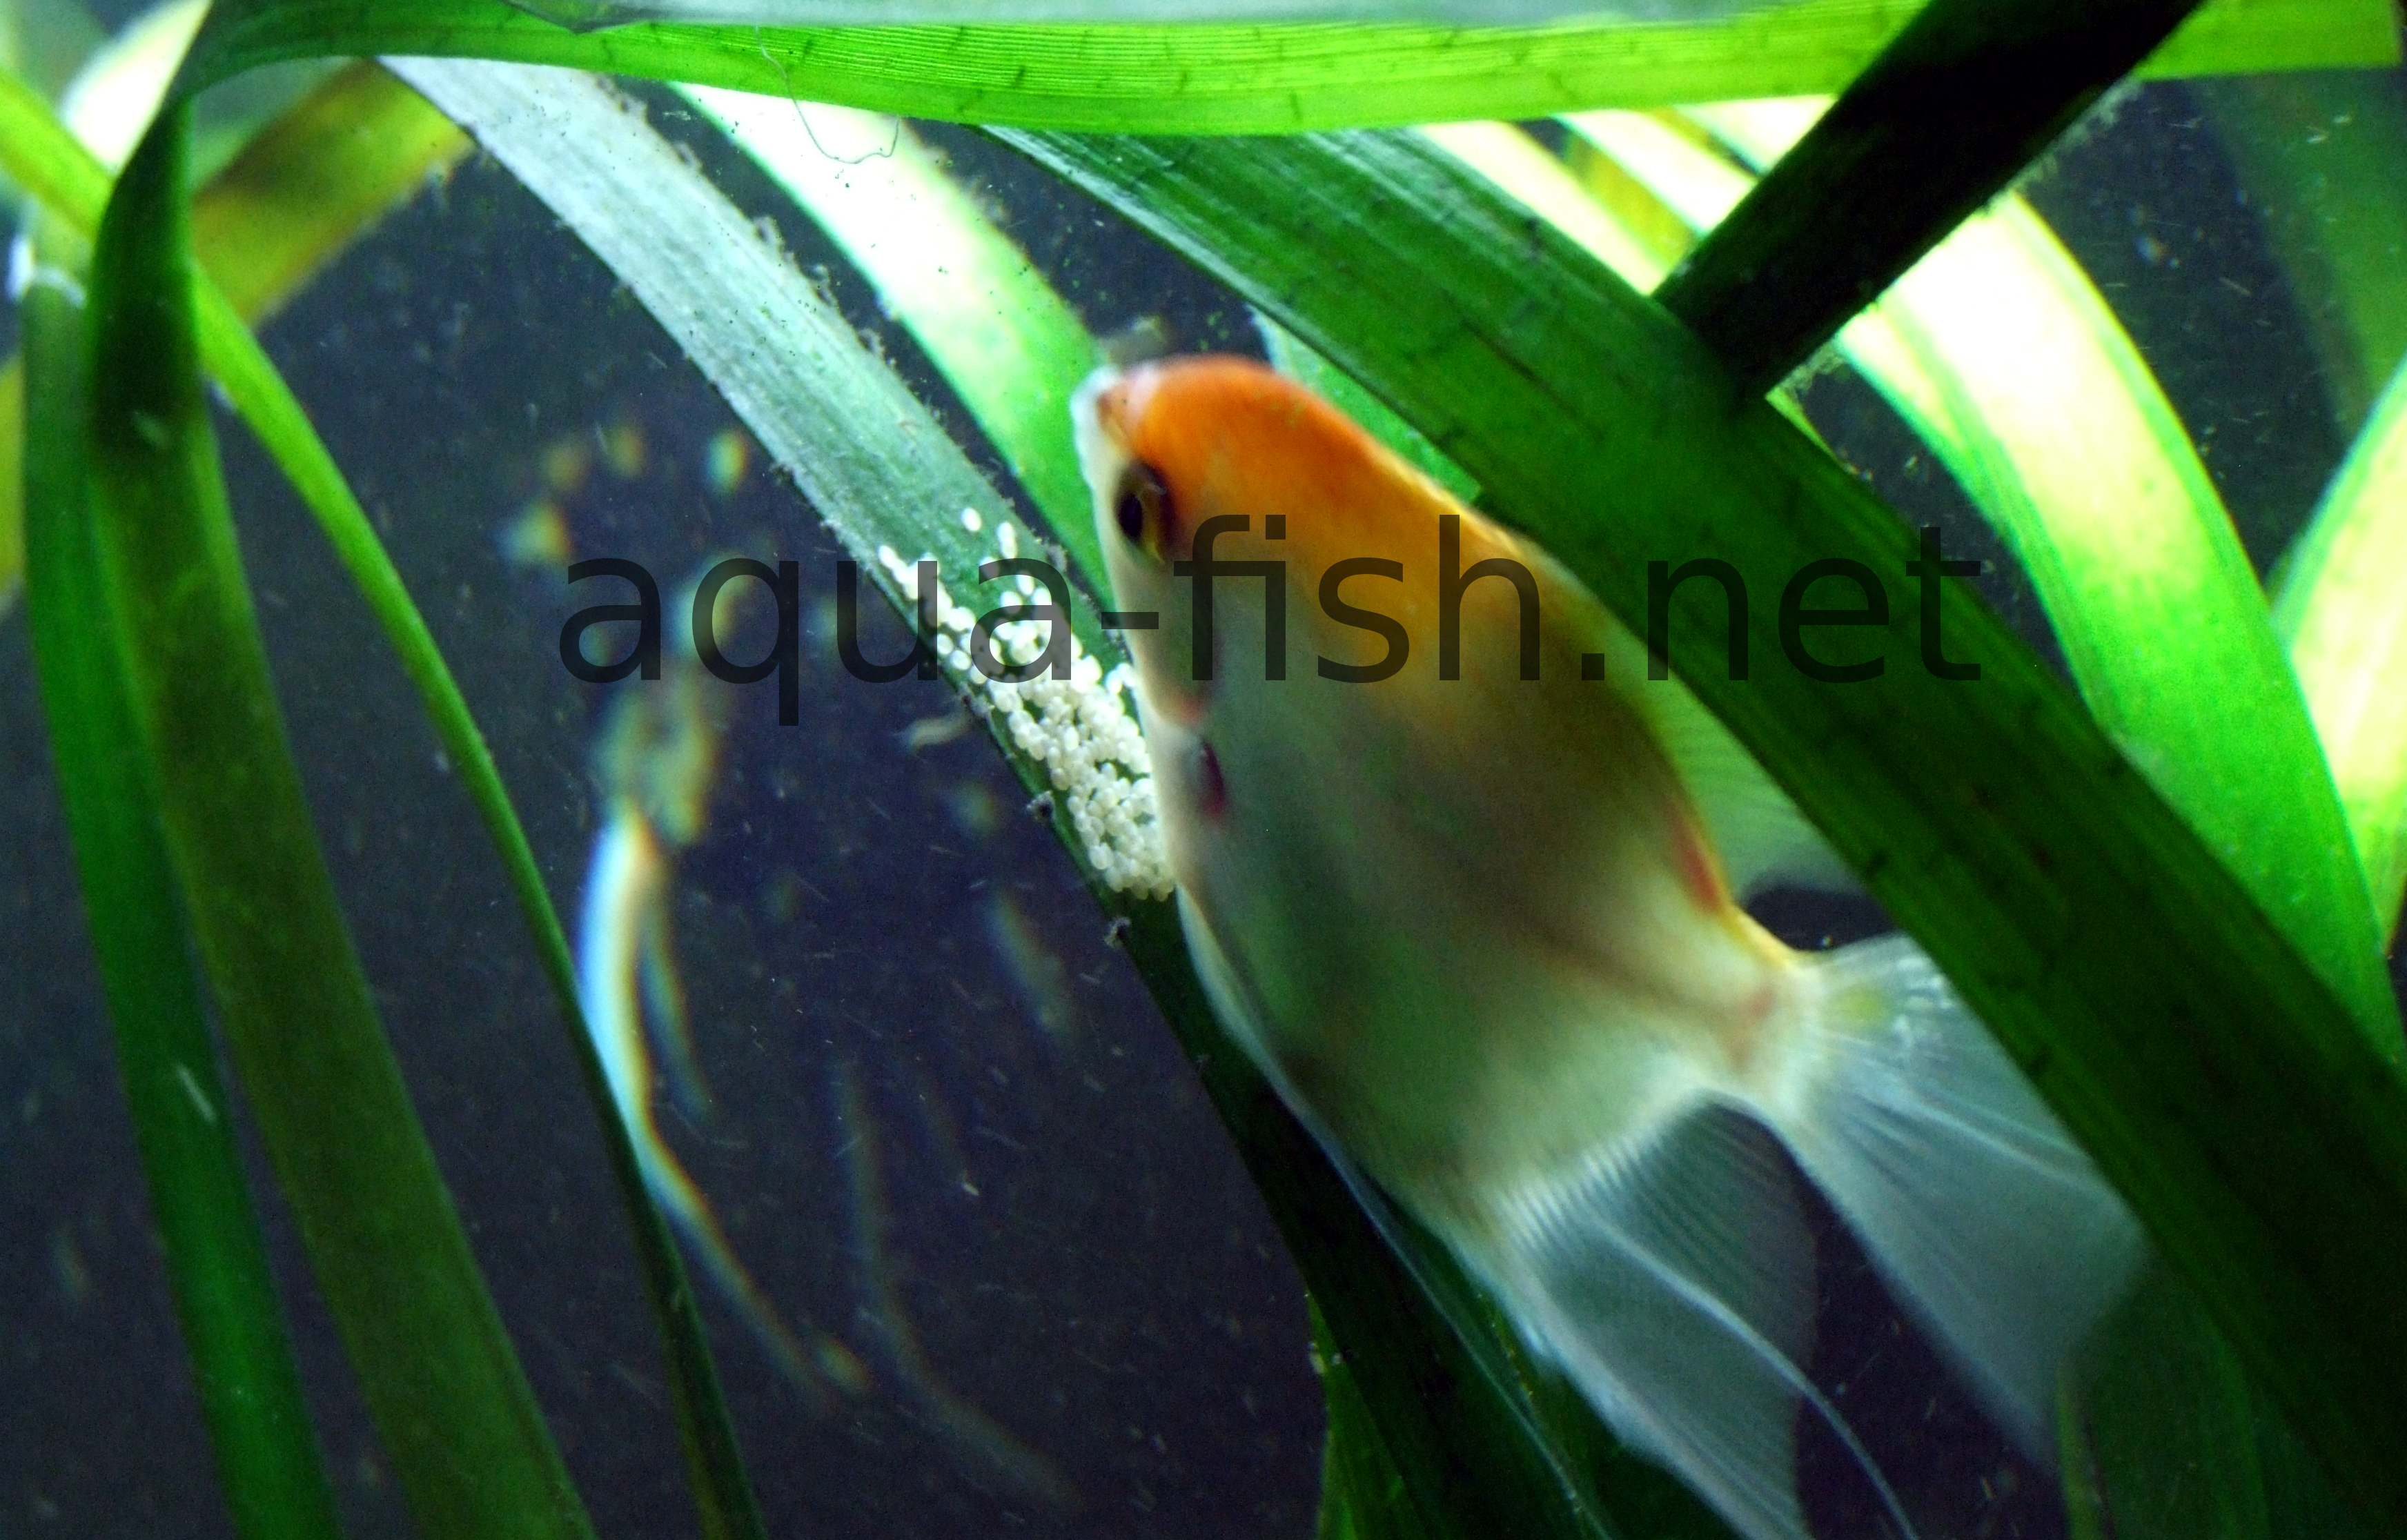 What are freshwater angelfish?